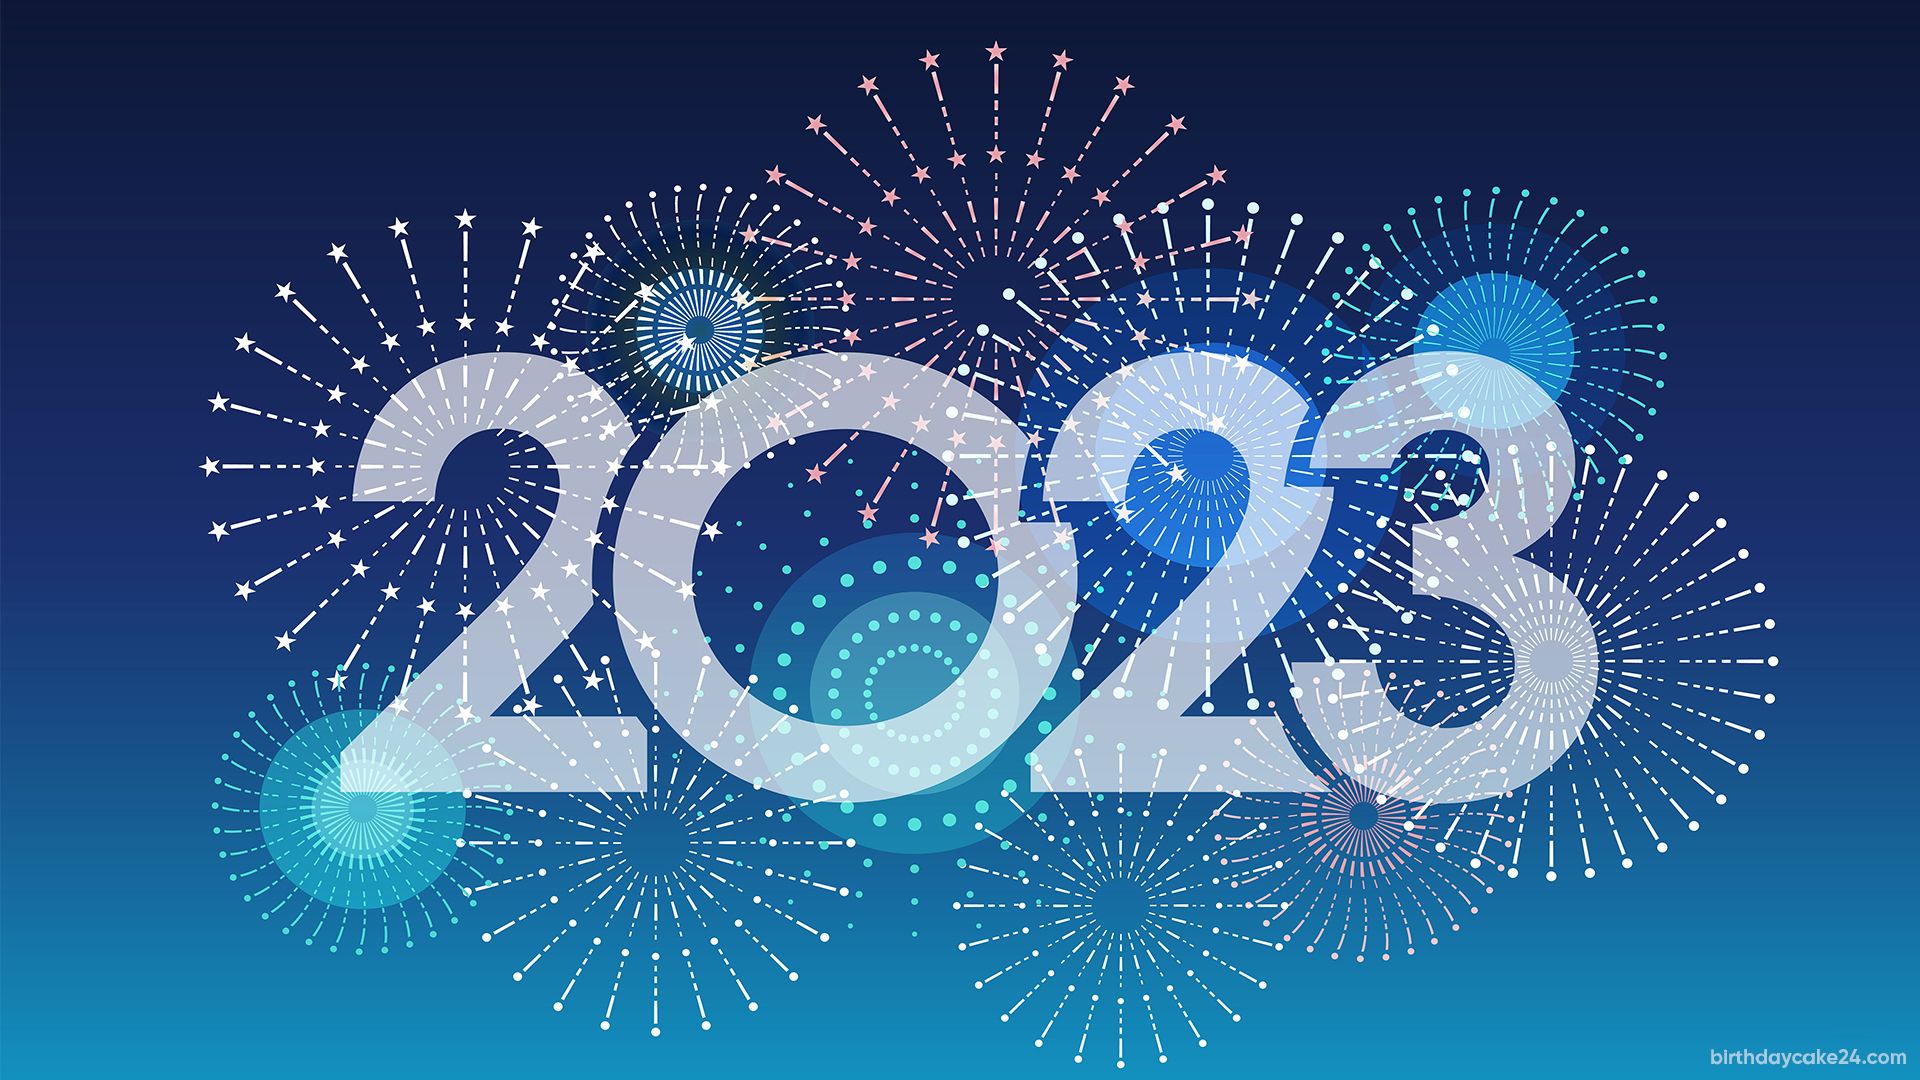 New Year 2023 Wallpapers 4k Hd New Year 2023 Backgrounds On Wallpaperbat 6704